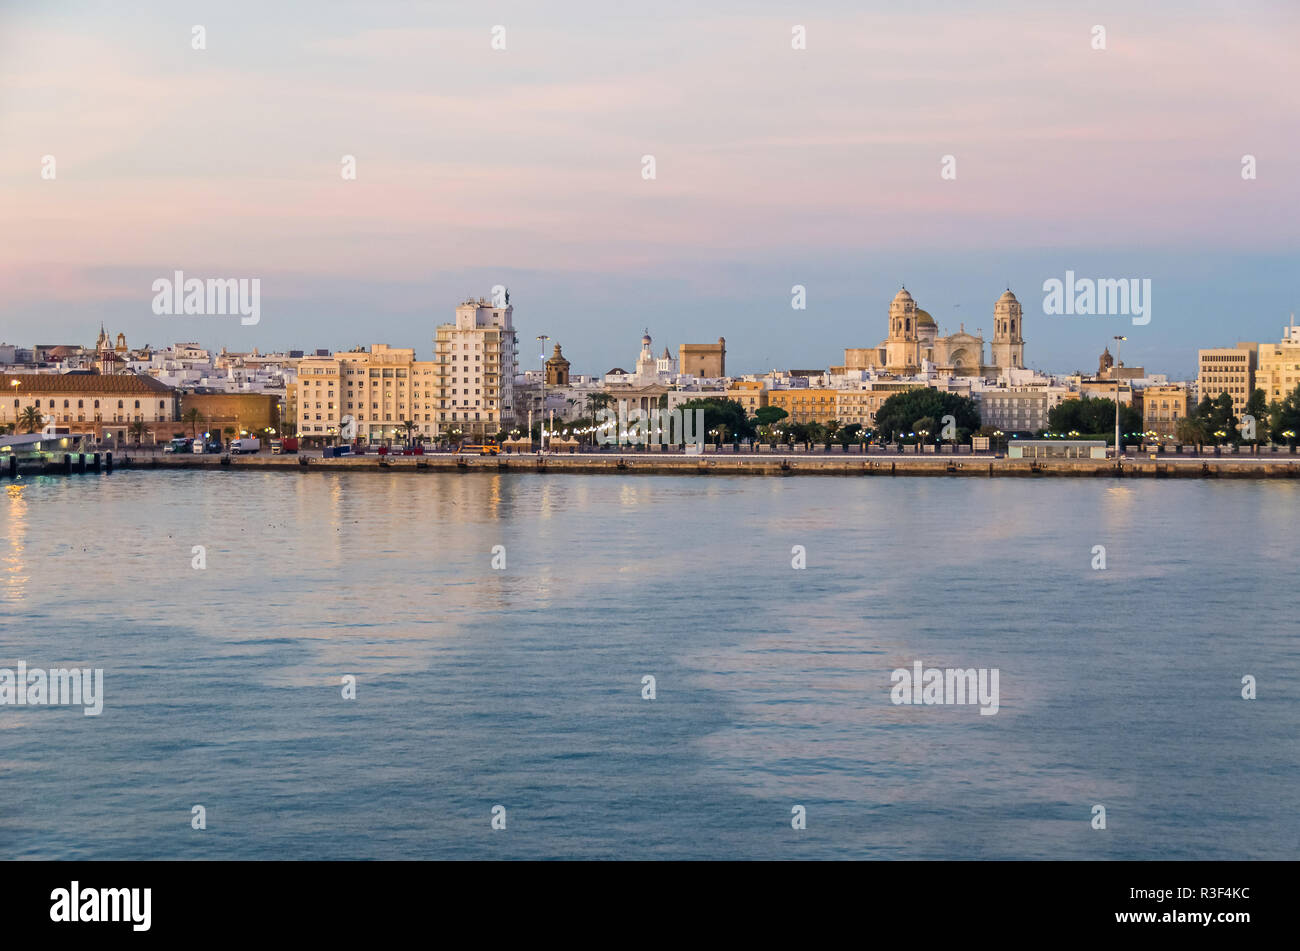 Cadiz, the oldest continuously inhabited city in Western Europe, with its Avenida del Puerto, Plaza de Sevilla,the building of the newspaper  publishe Stock Photo